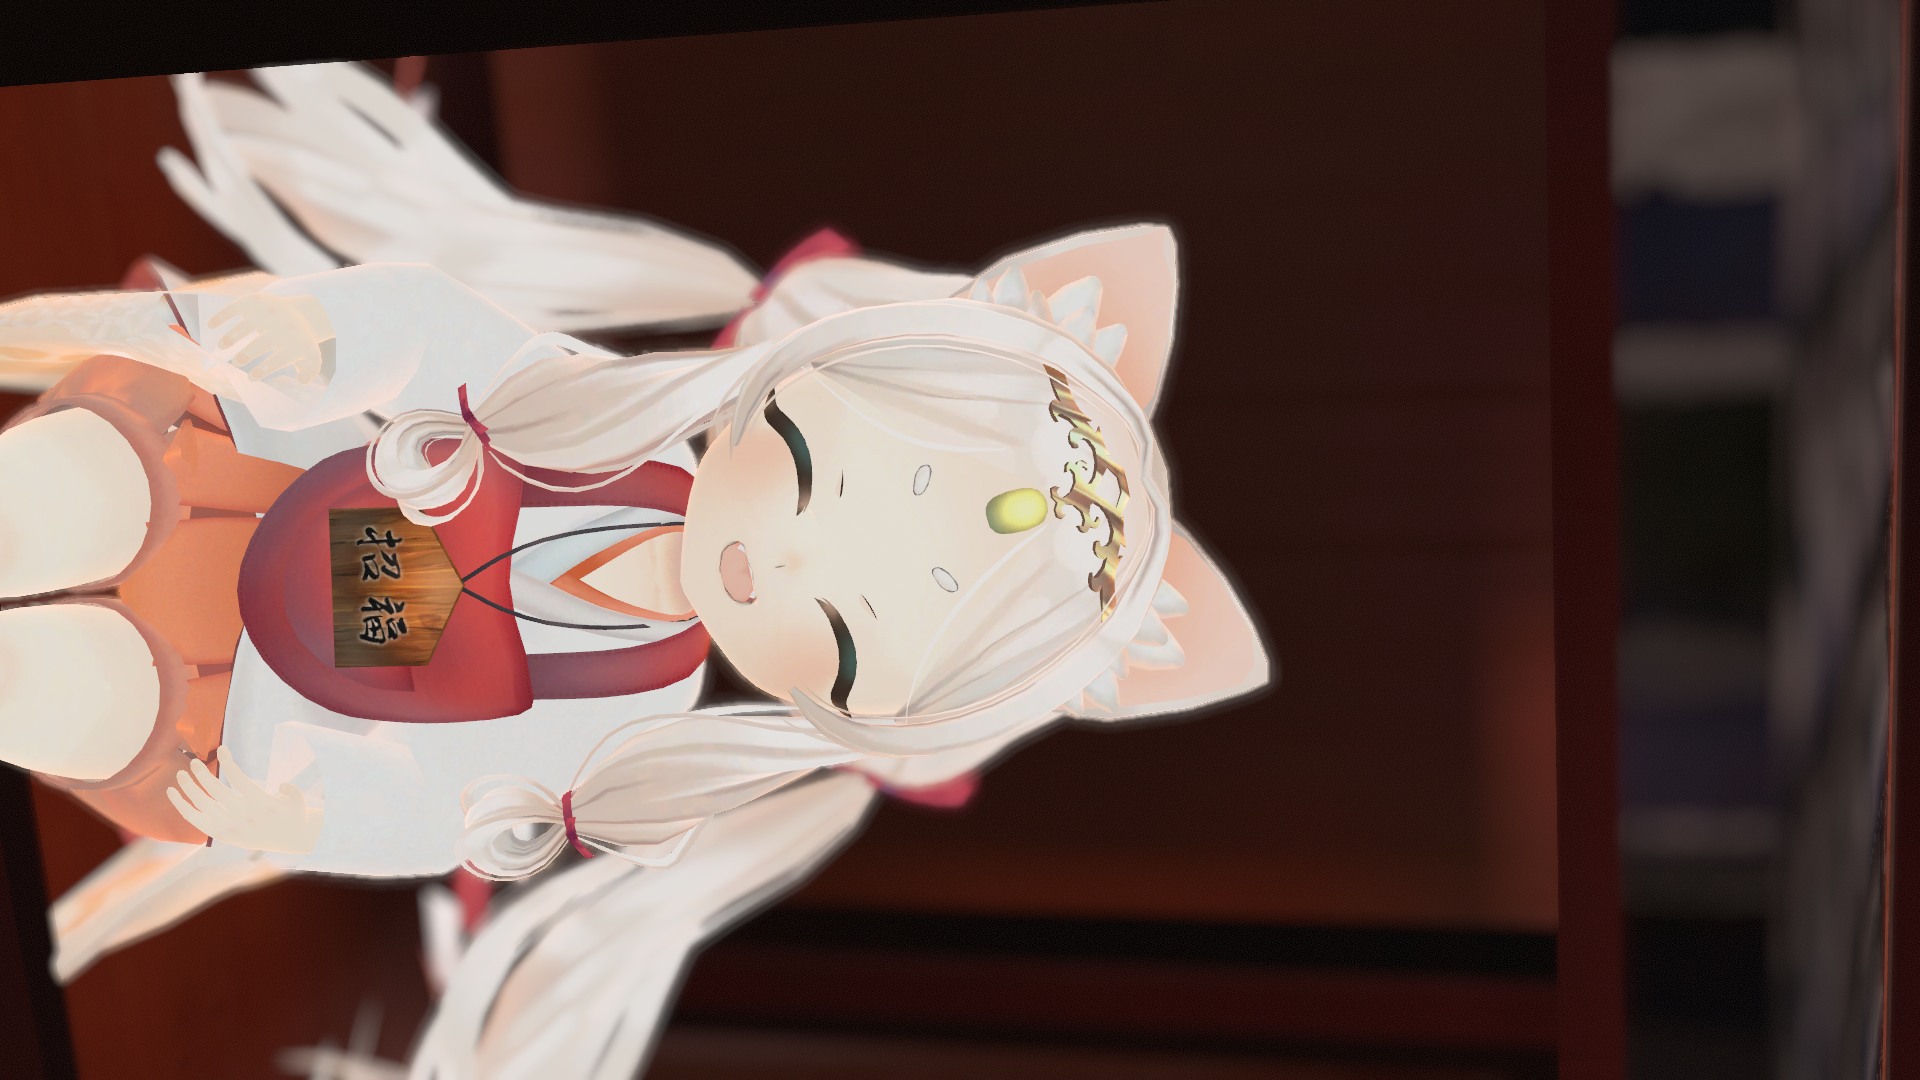 VRChat_1920x1080_2021-12-05_05-34-07.491.png